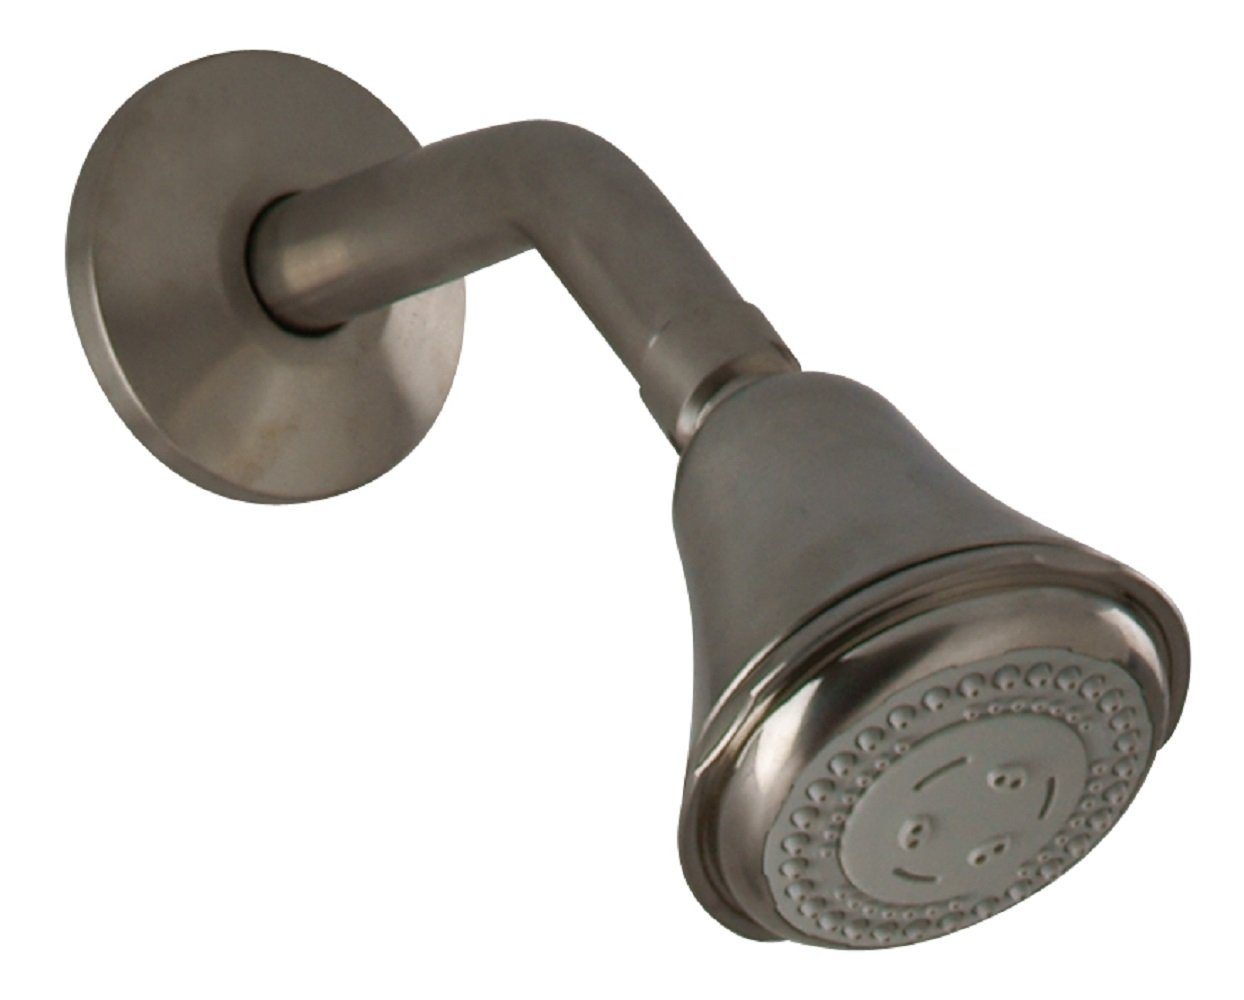 Latoscana Ornellaia 3 Function With Arm And Flange In A Brushed Nickel Finish bathroom fixture hardware parts Latoscana 